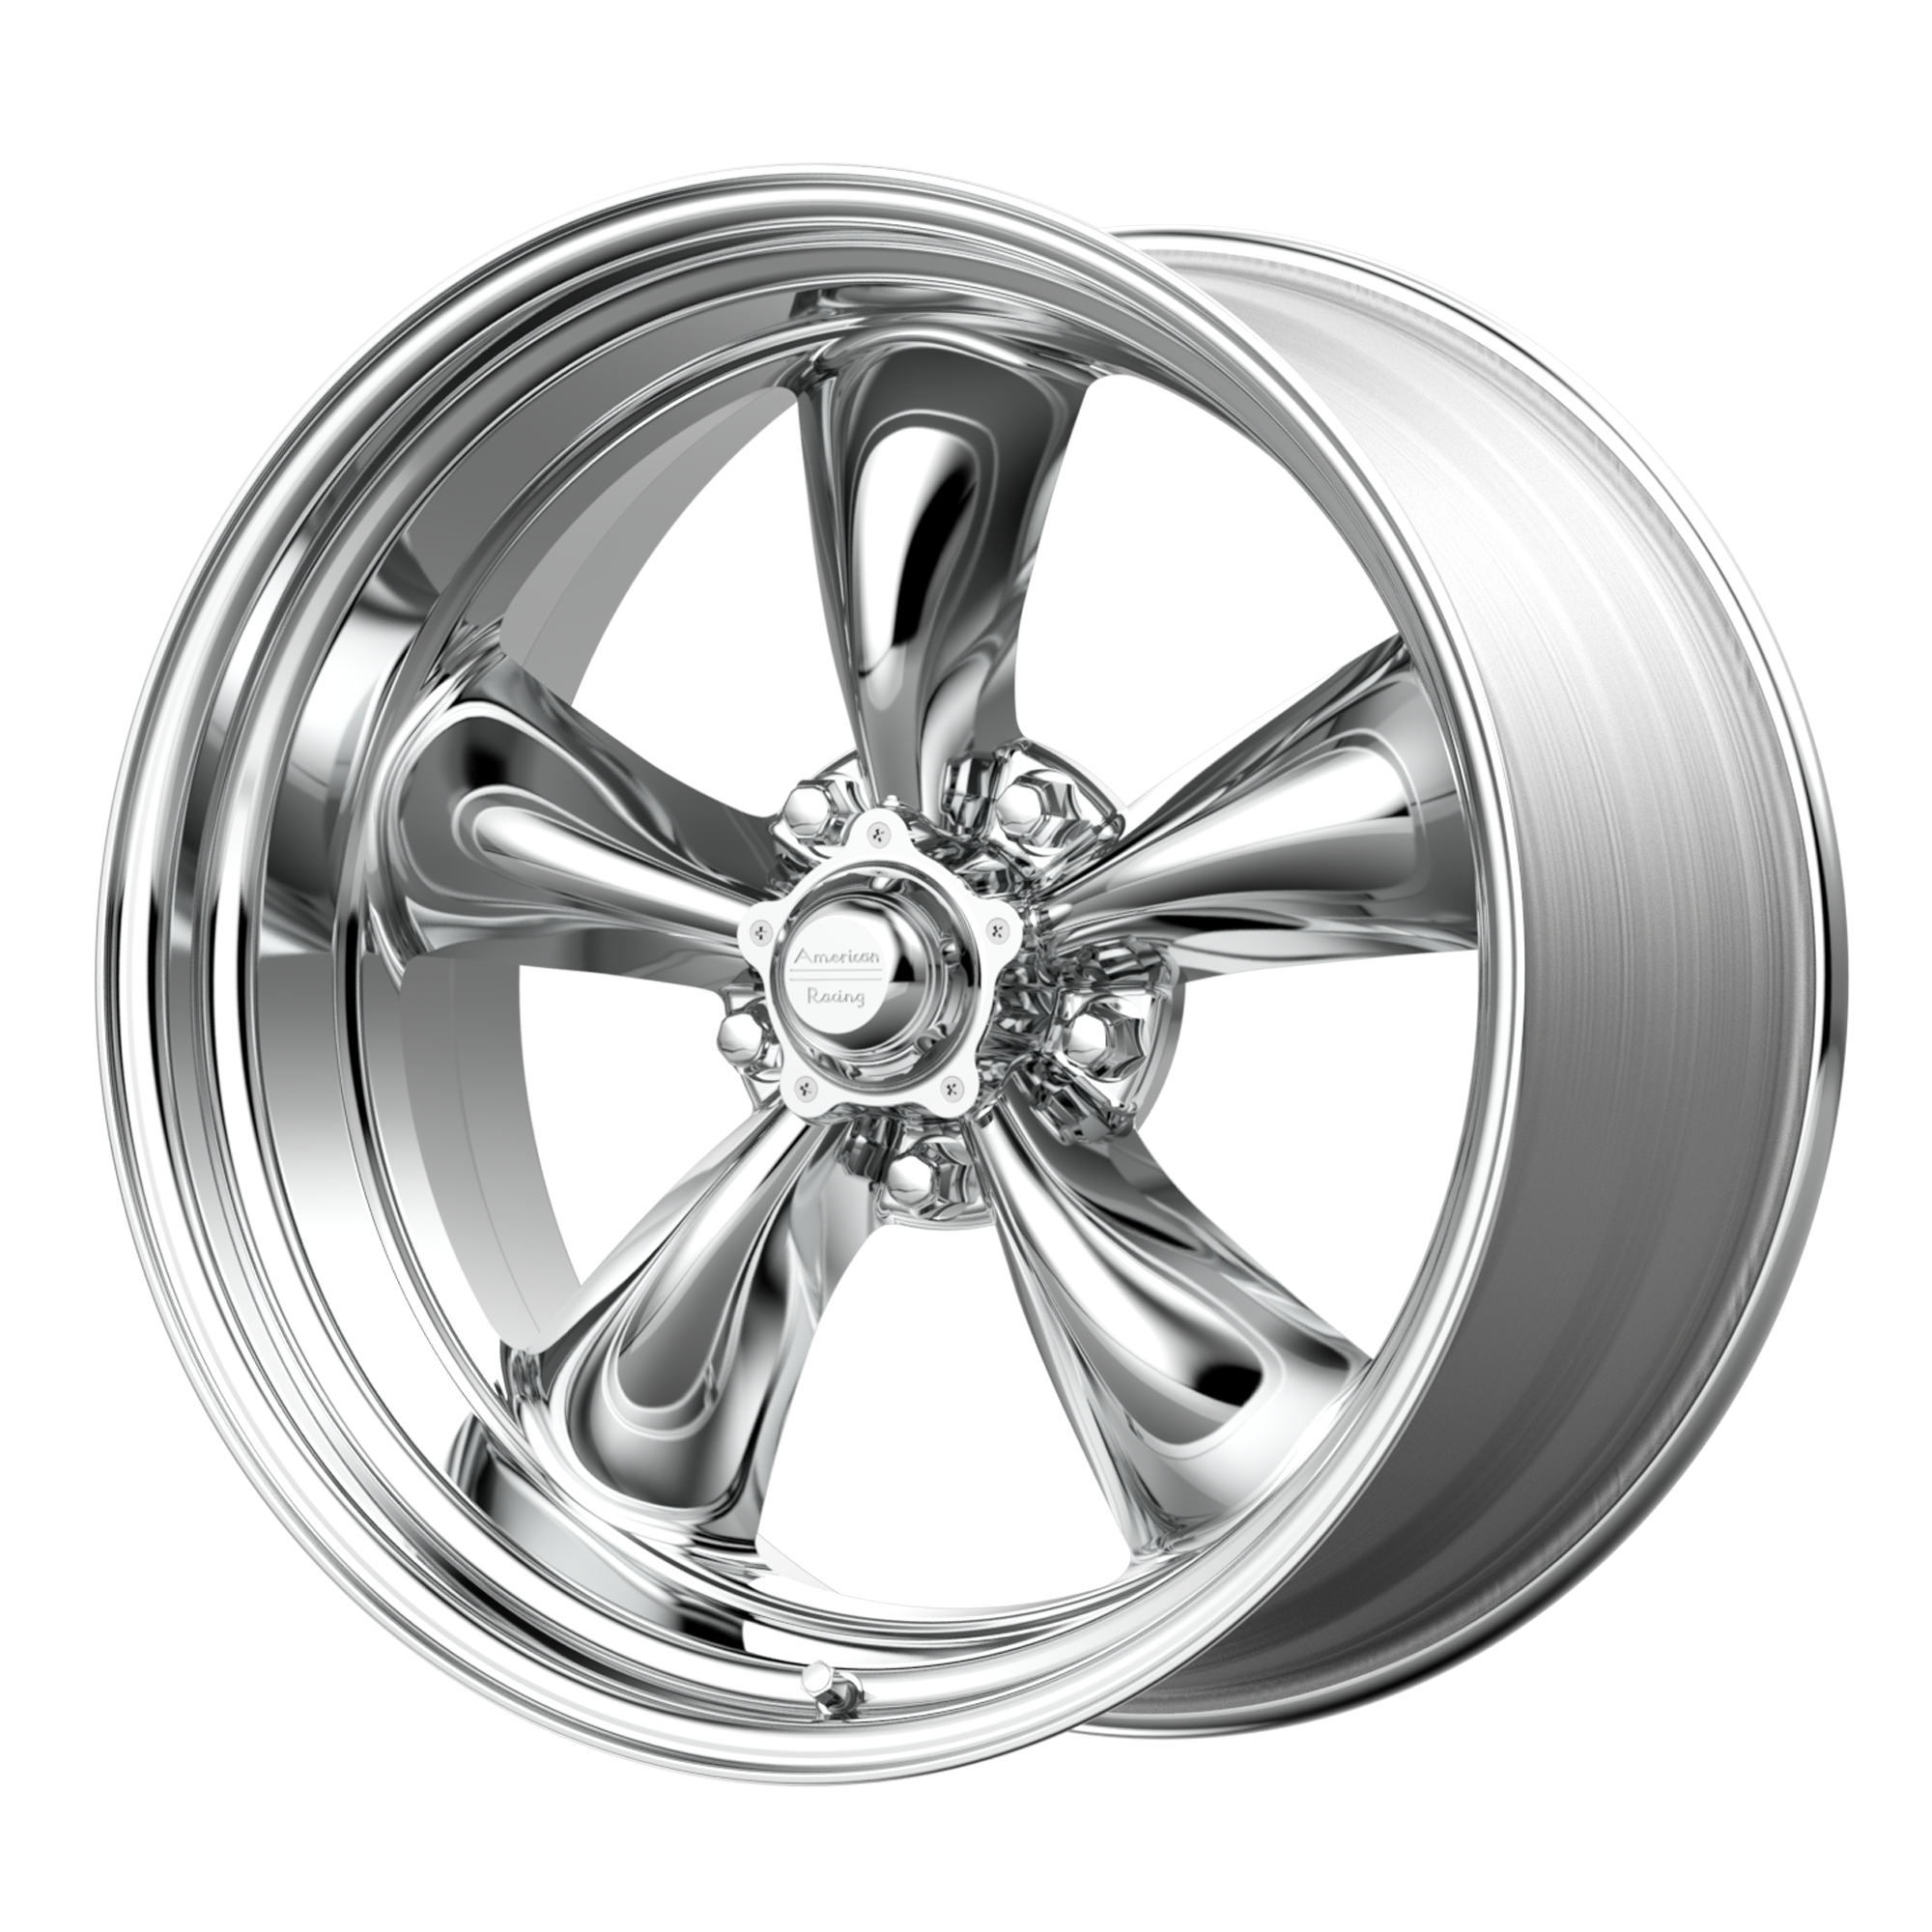 TORQ THRUST II 1 PC 15x6 5x114.30 POLISHED (-6 mm) - Tires and Engine Performance